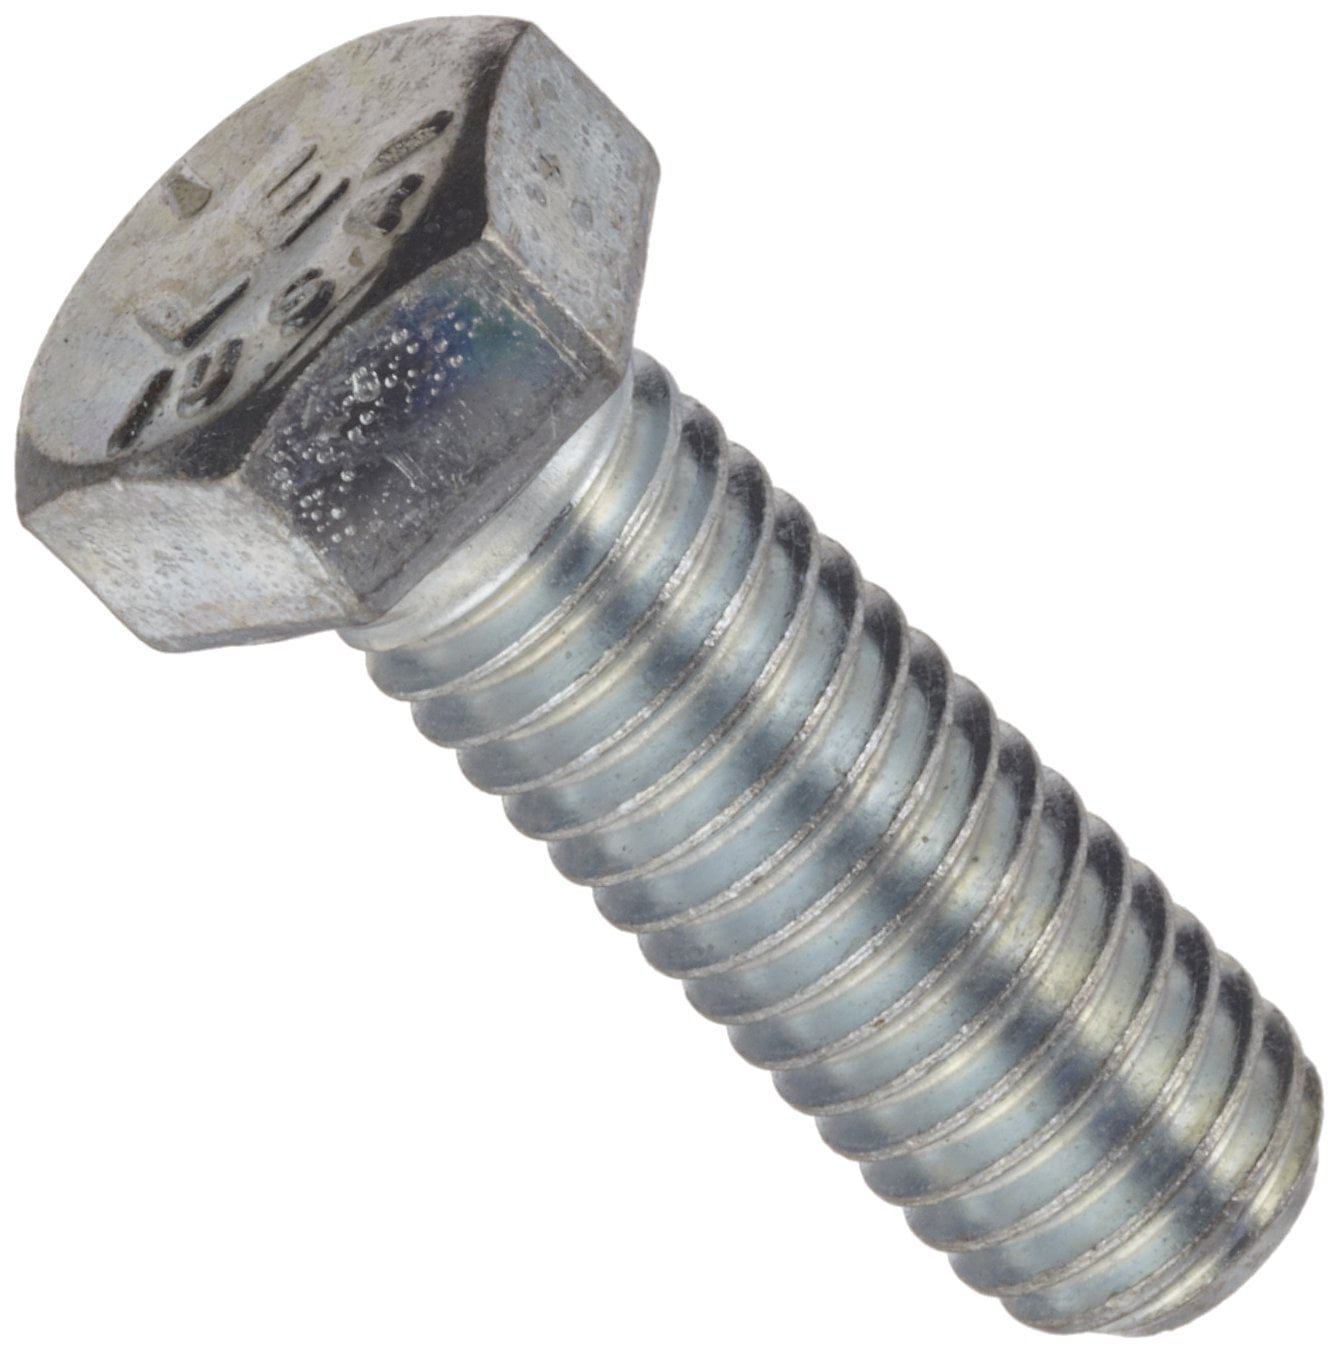 Grade 5 Steel Bolt Zinc Plated Finish Unc Threads Meets Asme B1821sae J429 Specifications 